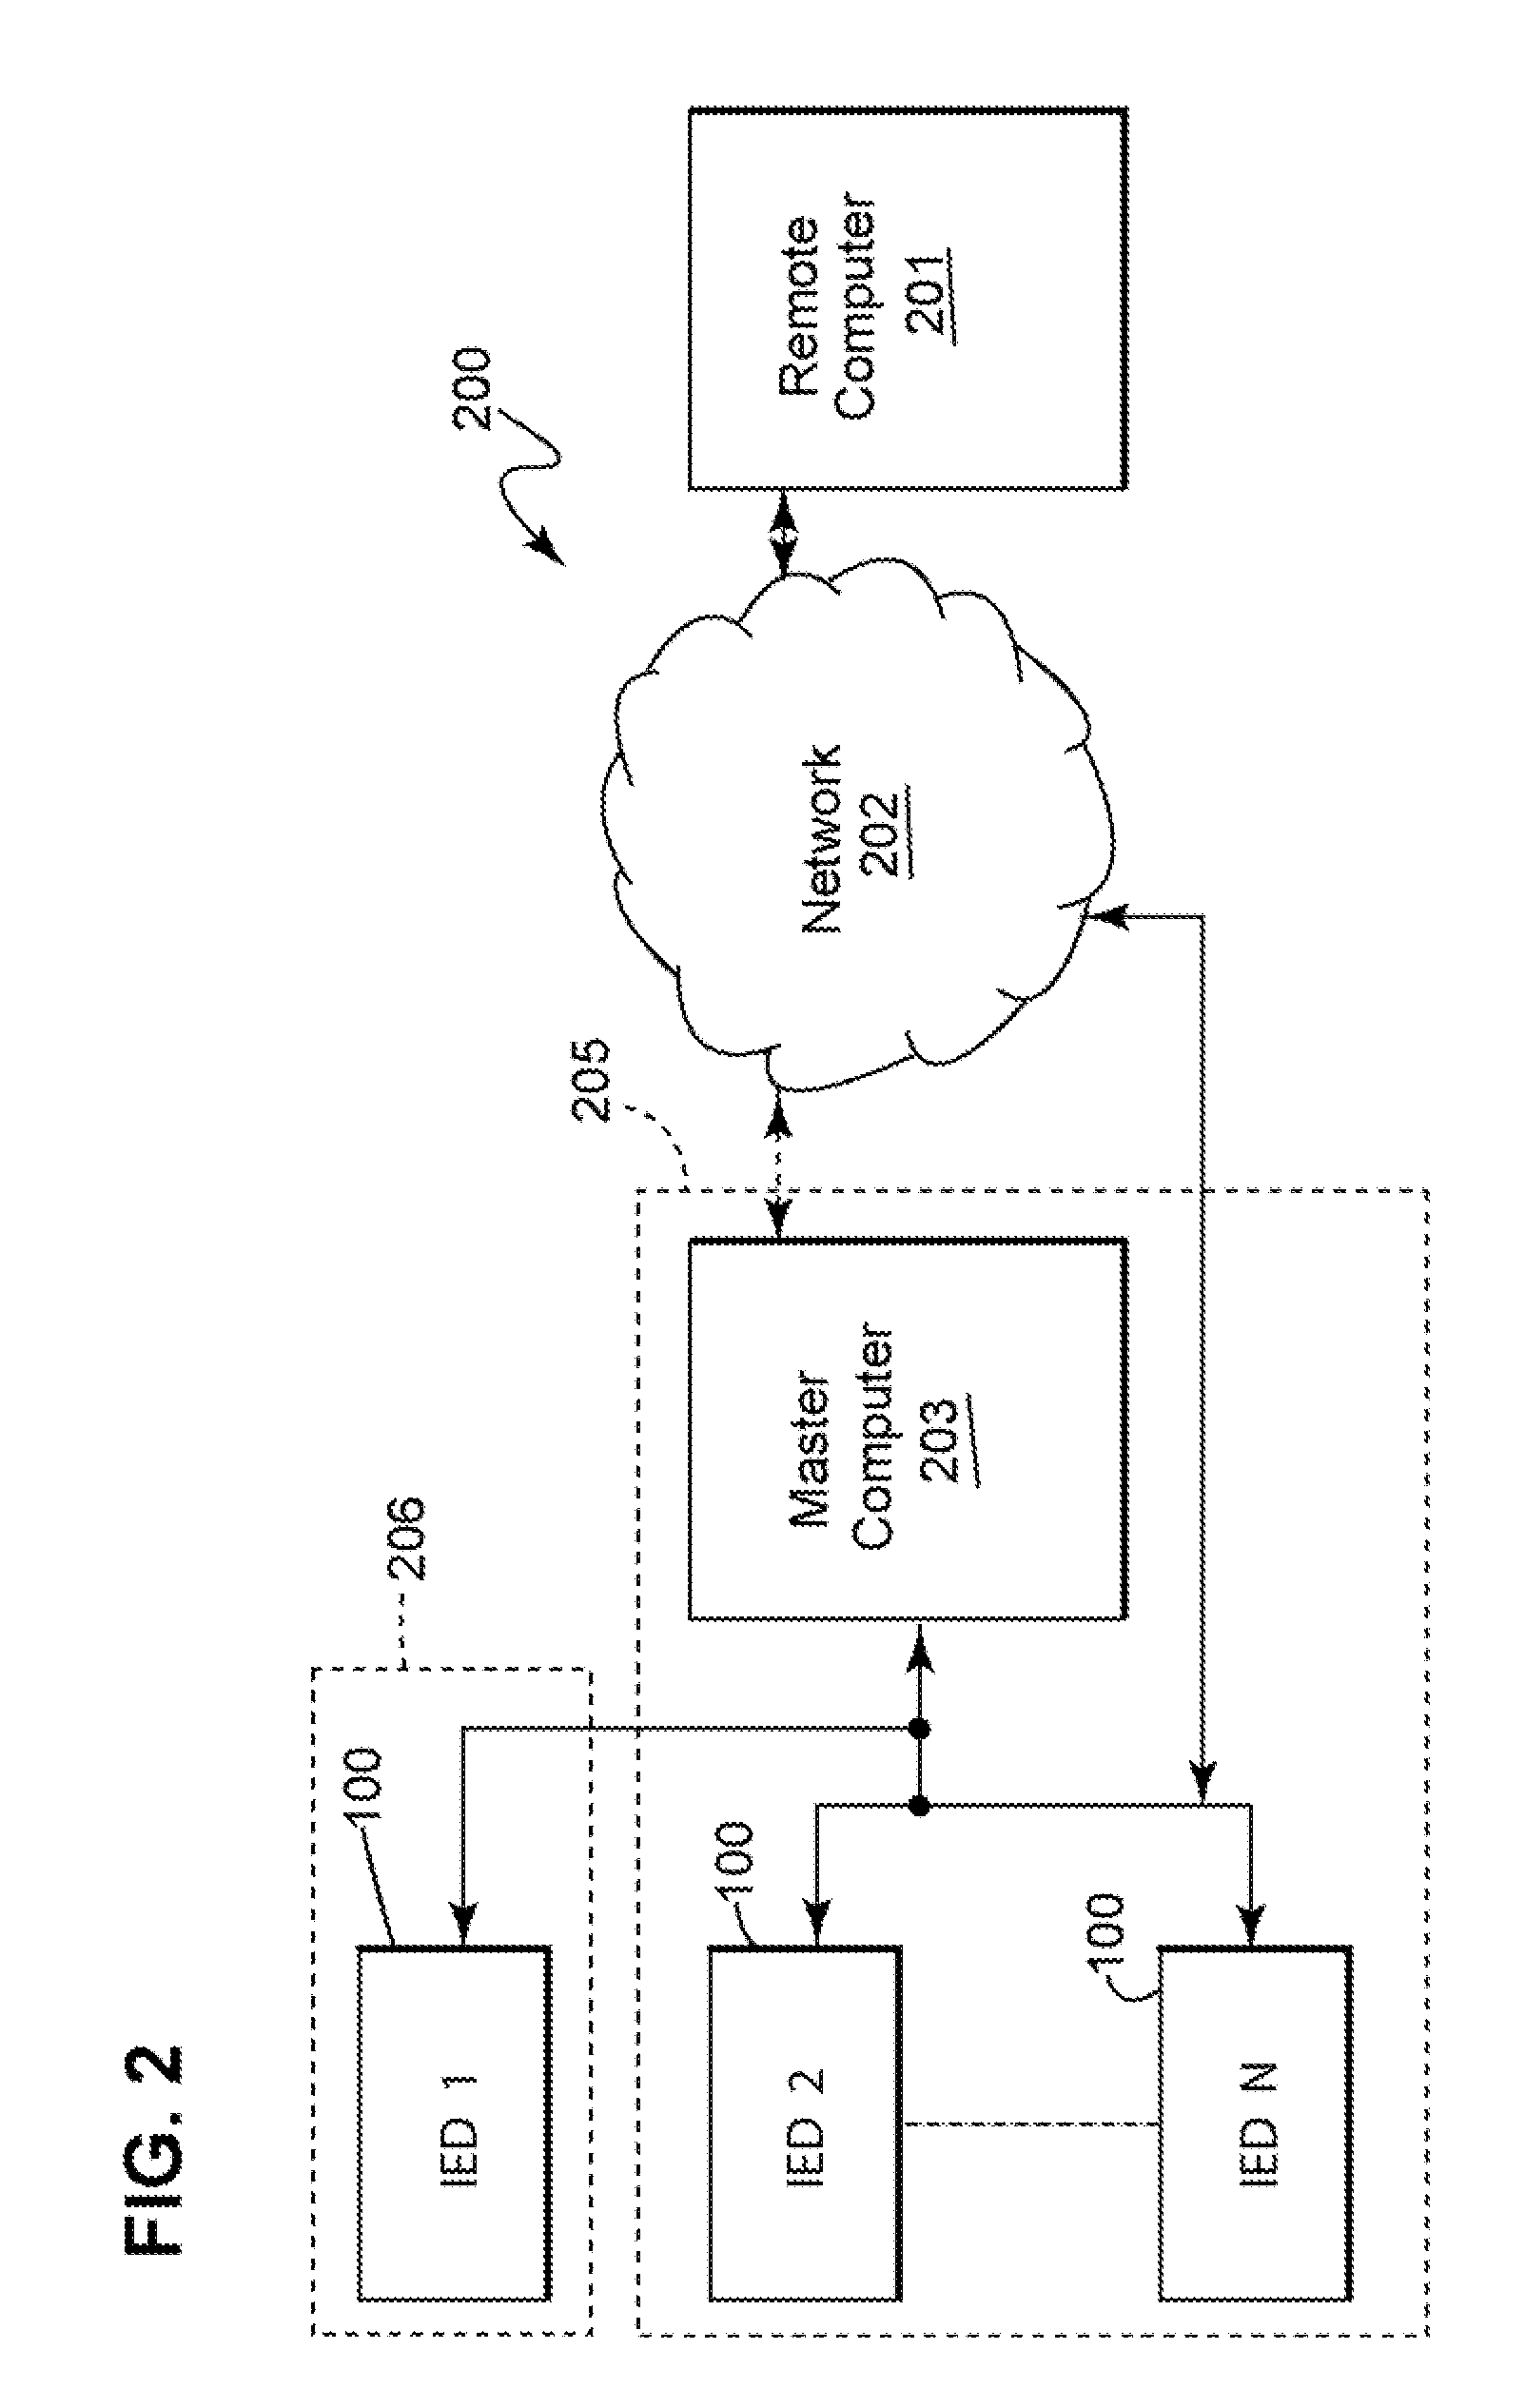 Apparatus, methods, and system for role-based access in an intelligent electronic device